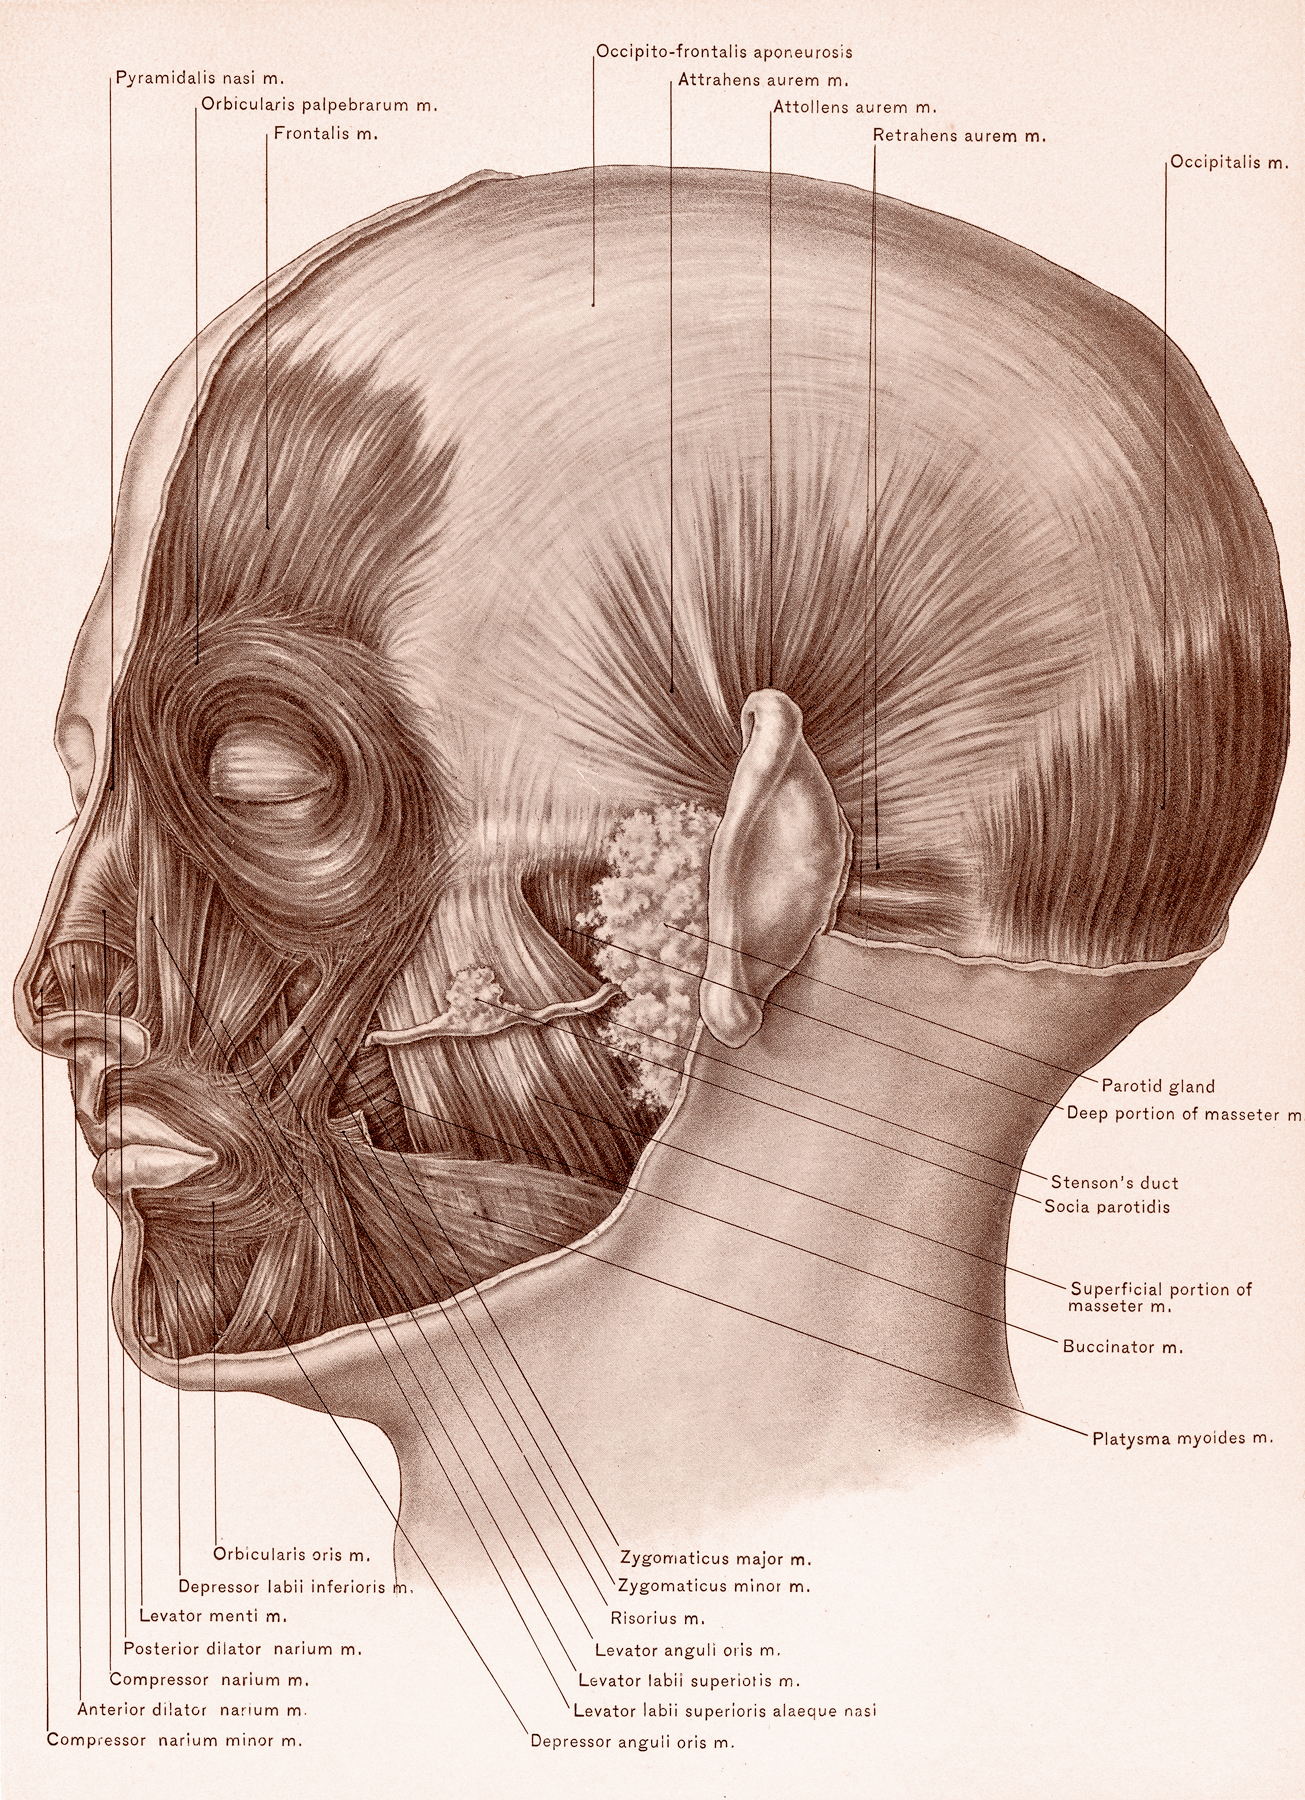 Muscles of face and scalp, circa 1902 photo